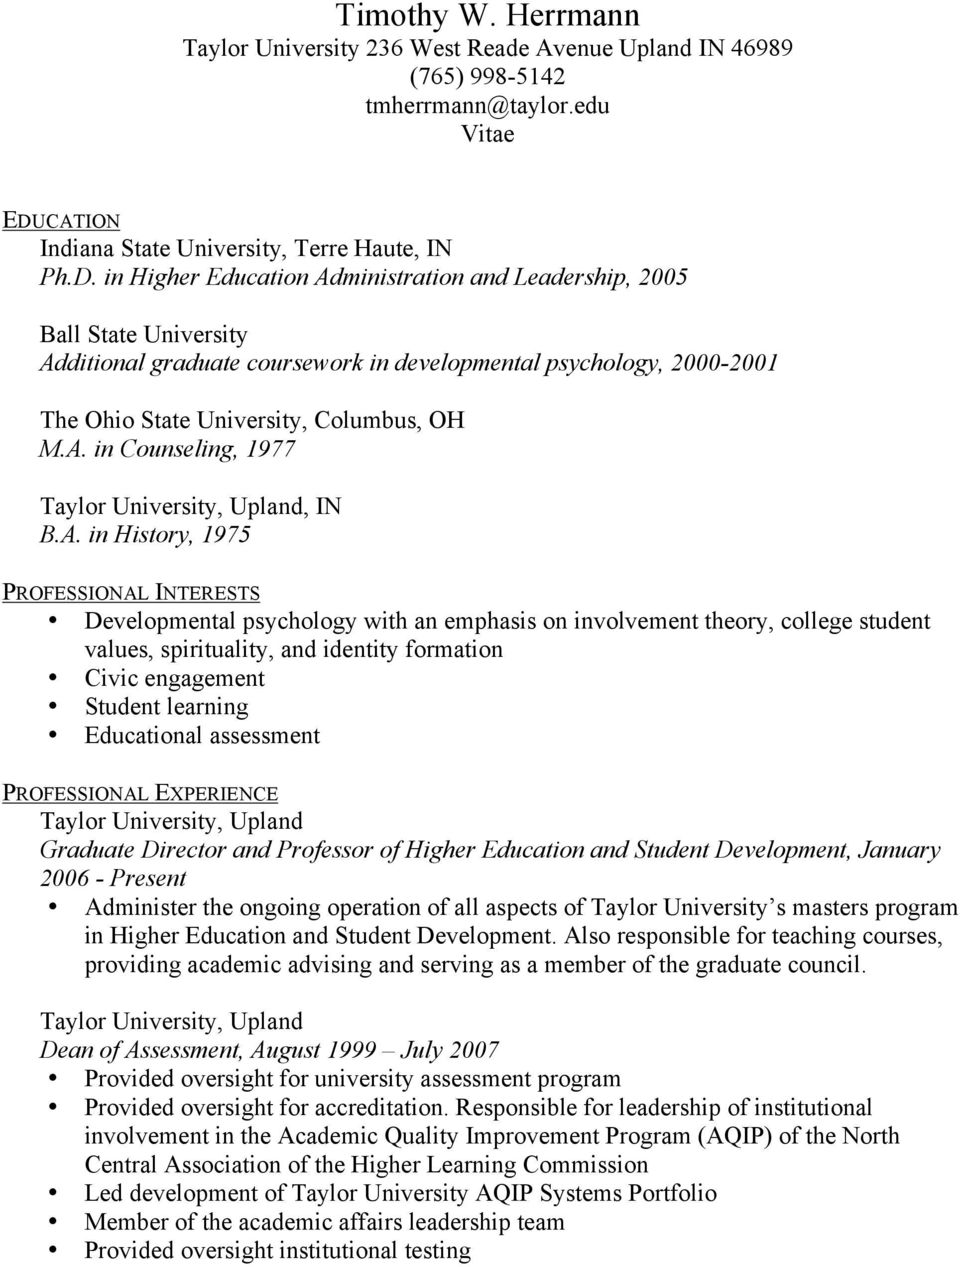 in Higher Education Administration and Leadership, 2005 Ball State University Additional graduate coursework in developmental psychology, 2000-2001 The Ohio State University, Columbus, OH M.A. in Counseling, 1977 Taylor University, Upland, IN B.